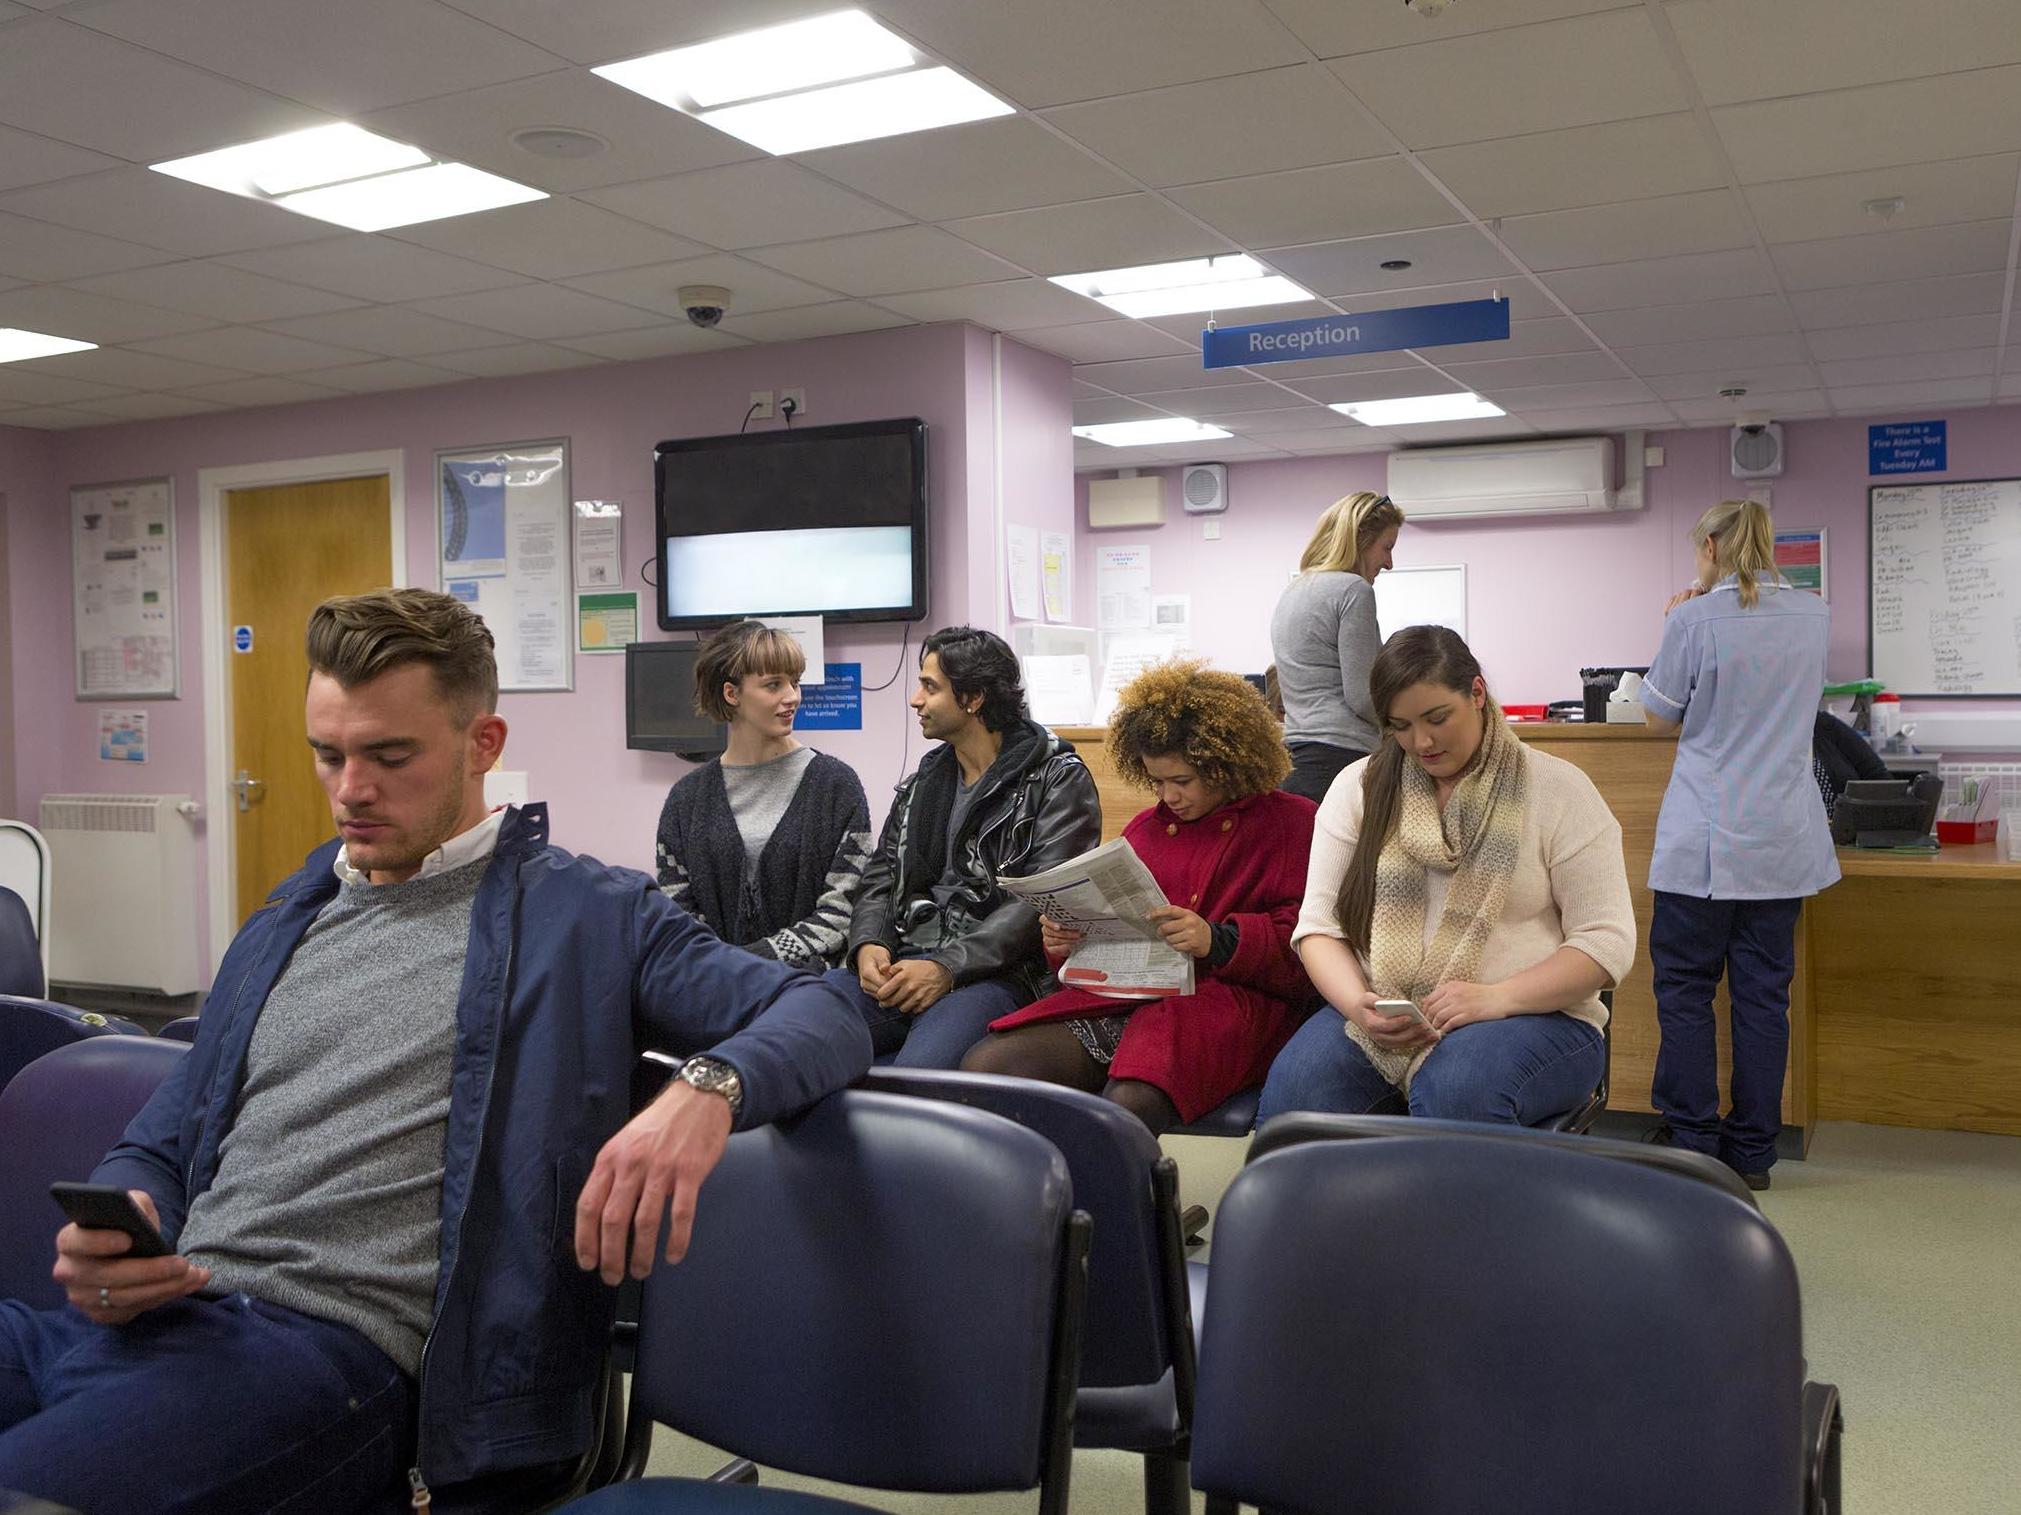 700,000 patients could be left without access to a GP according to the Health Foundation